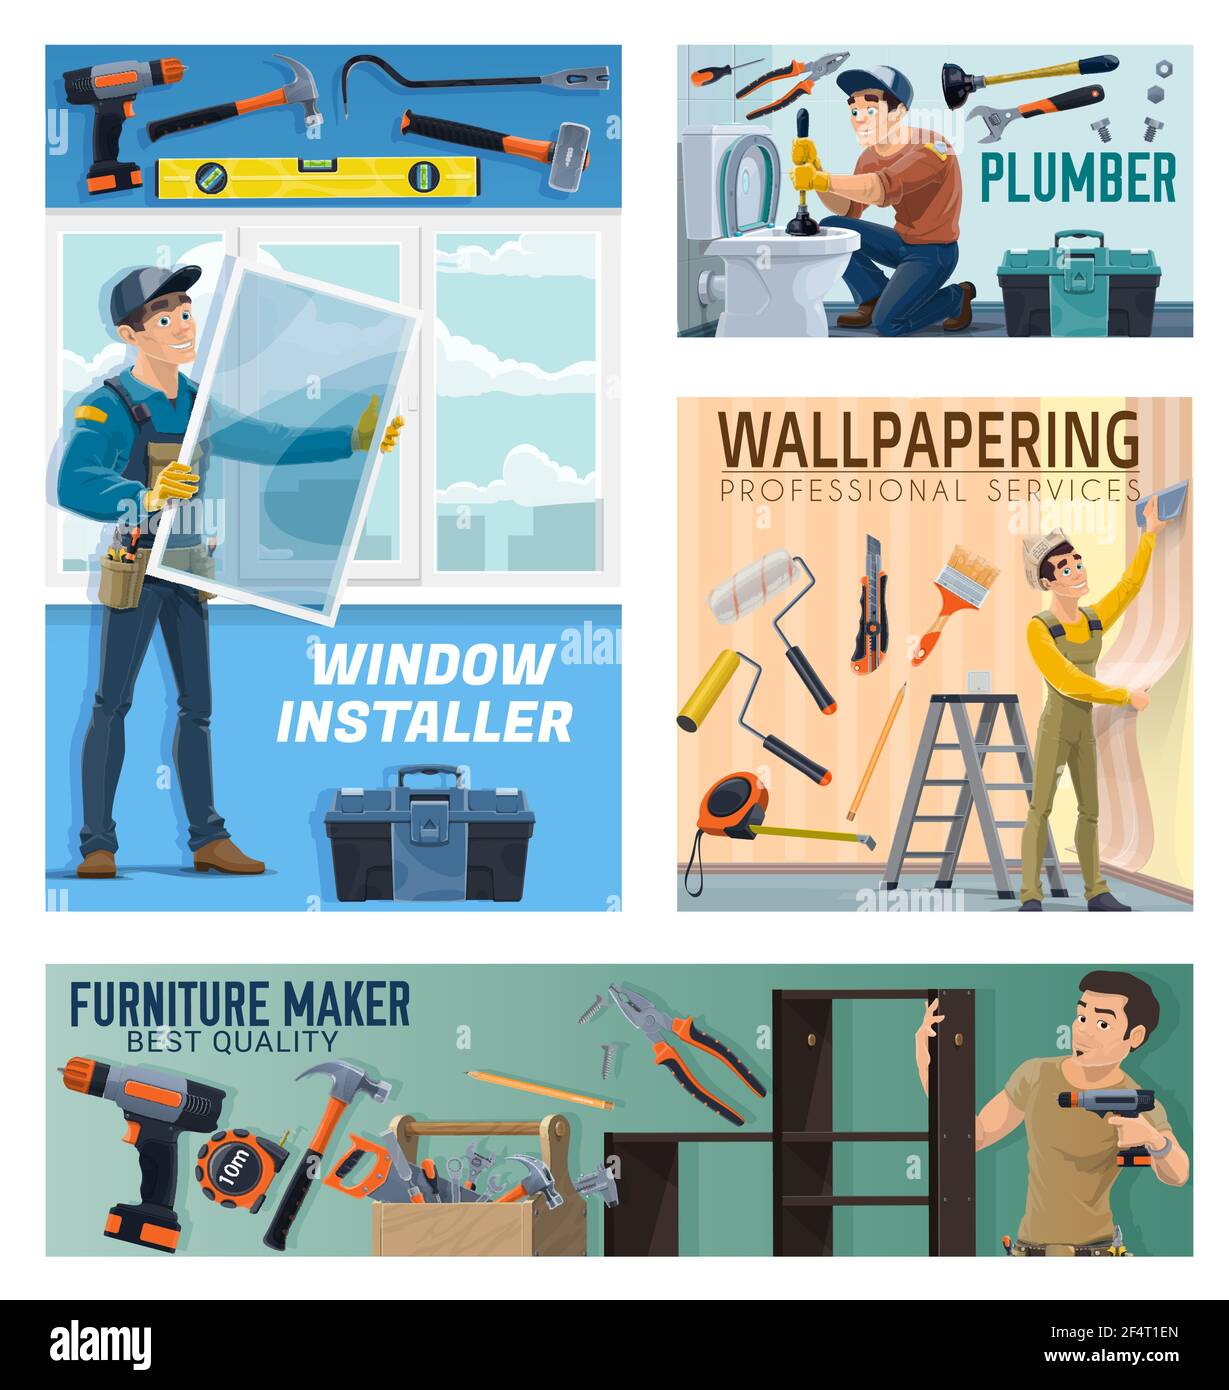 How to wallpaper  measuring cutting and hanging estimating  DIY info